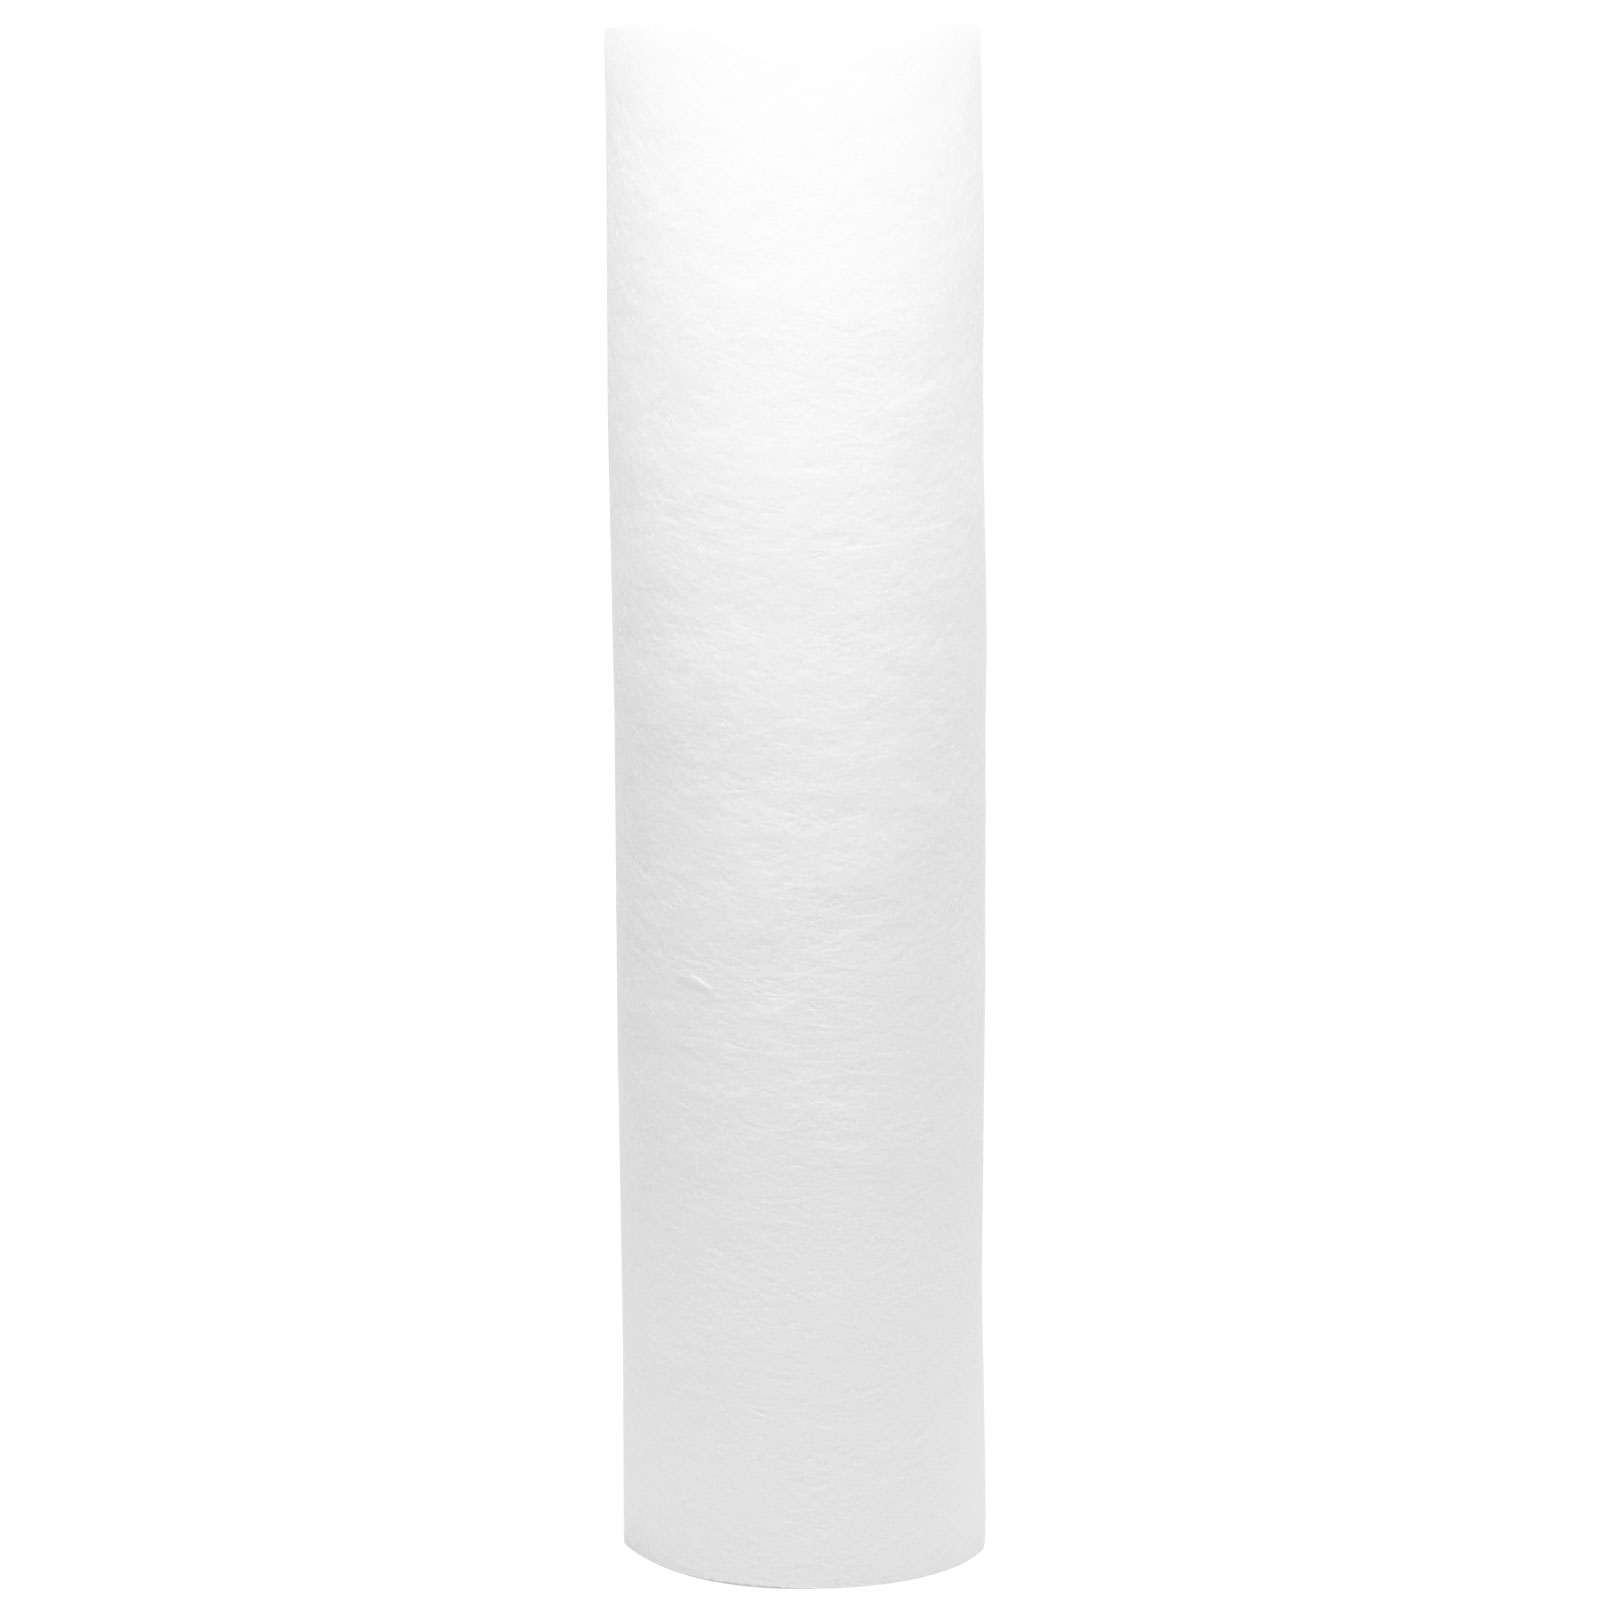 8-Pack Replacement for Watts CT-1 Polypropylene Sediment Filter - Universal 10-inch 5-Micron Cartridge for WATTS PREMIER 500515 CT-1 DRINKING WATER SYSTEM - Denali Pure Brand - image 2 of 4